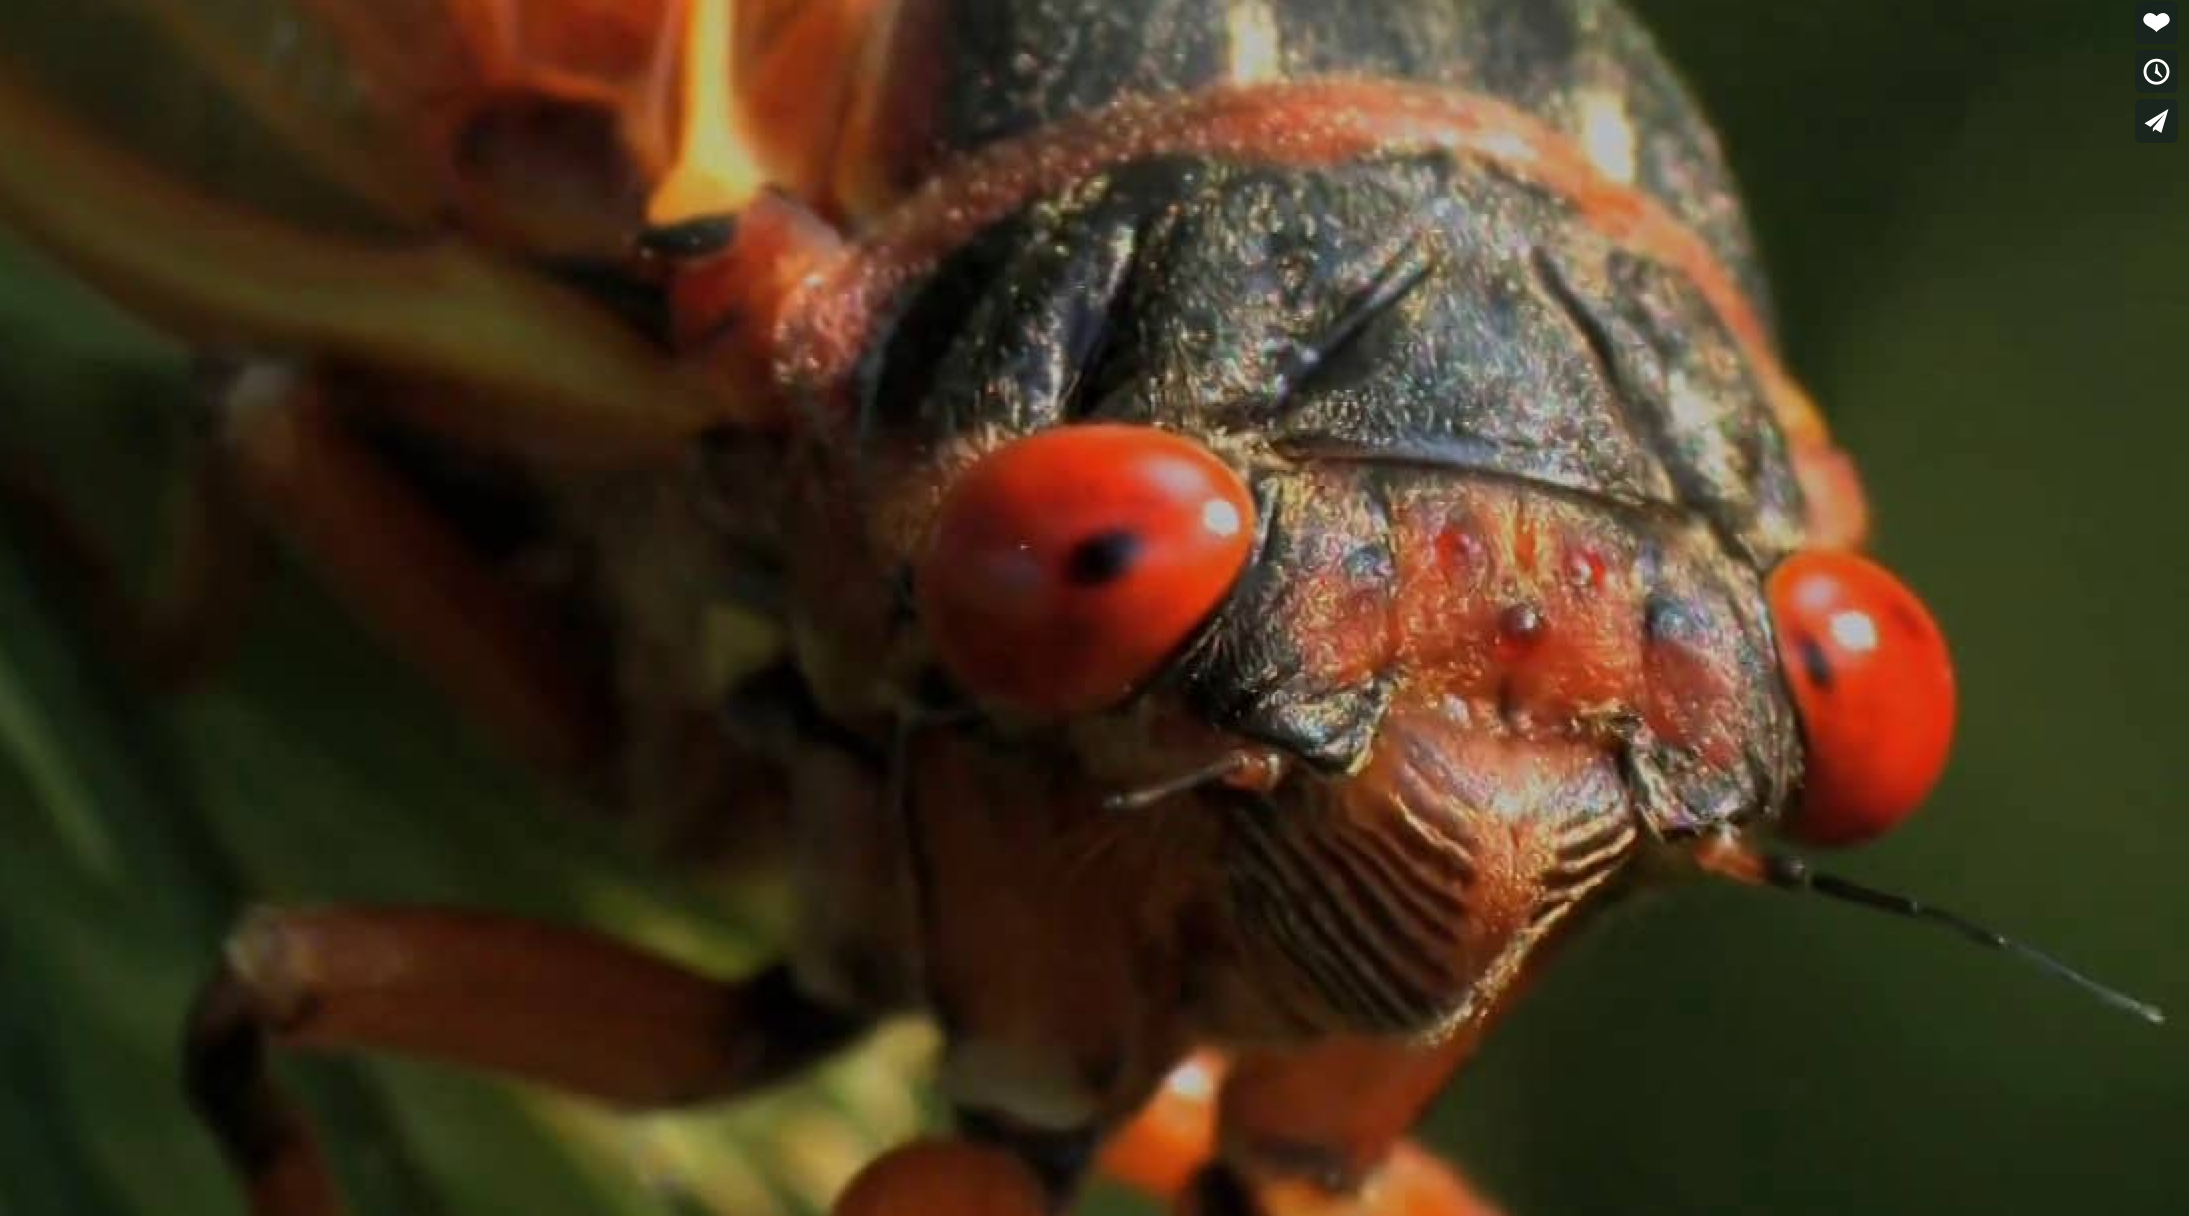 Bug Appetit: The 17-Year Cicada Presents Rare Opportunity for Anglers